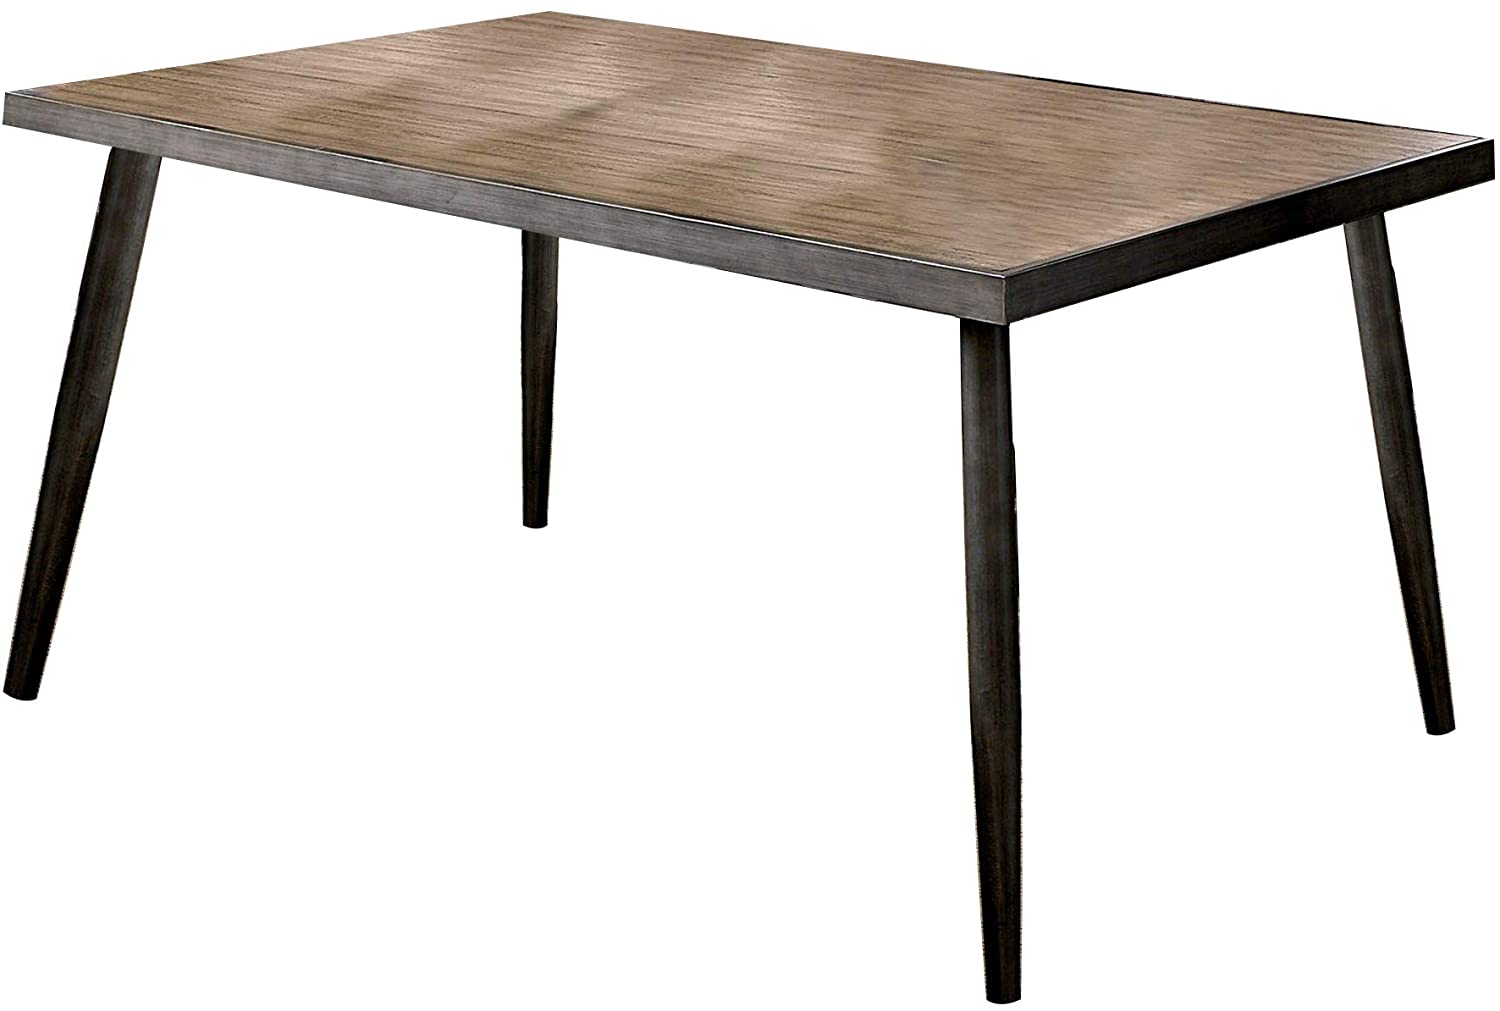 William’s Home Furnishing Vilhelm Grey Dining Table